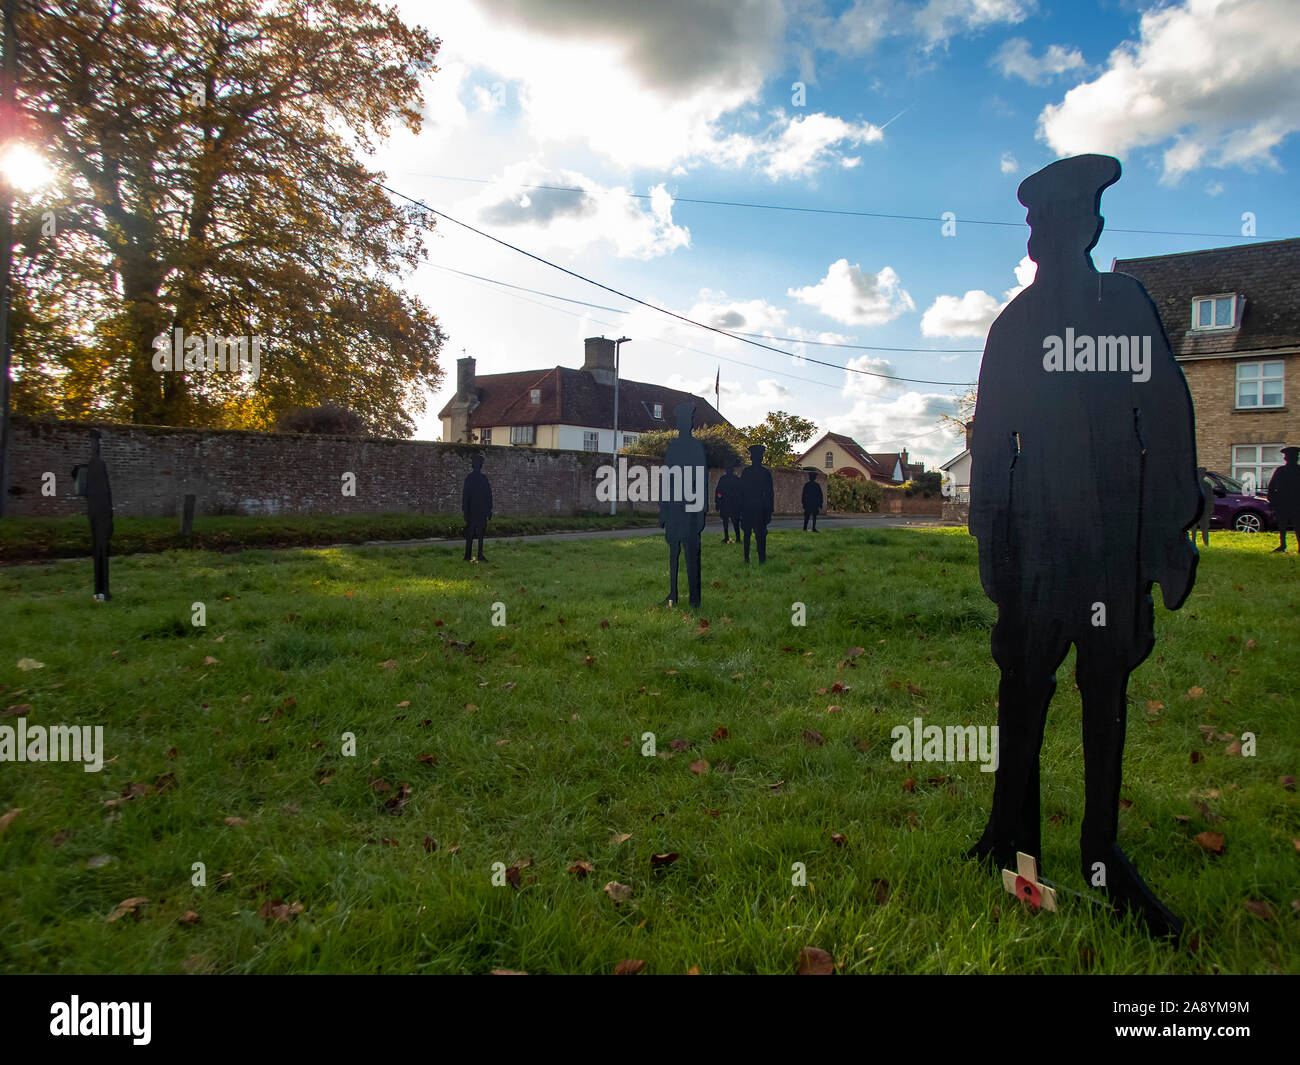 Haughley, Suffolk / UK - November 2019: The 'Haughley Lads' are wooden silhouettes to remember the men of the village who went to war and never return Stock Photo